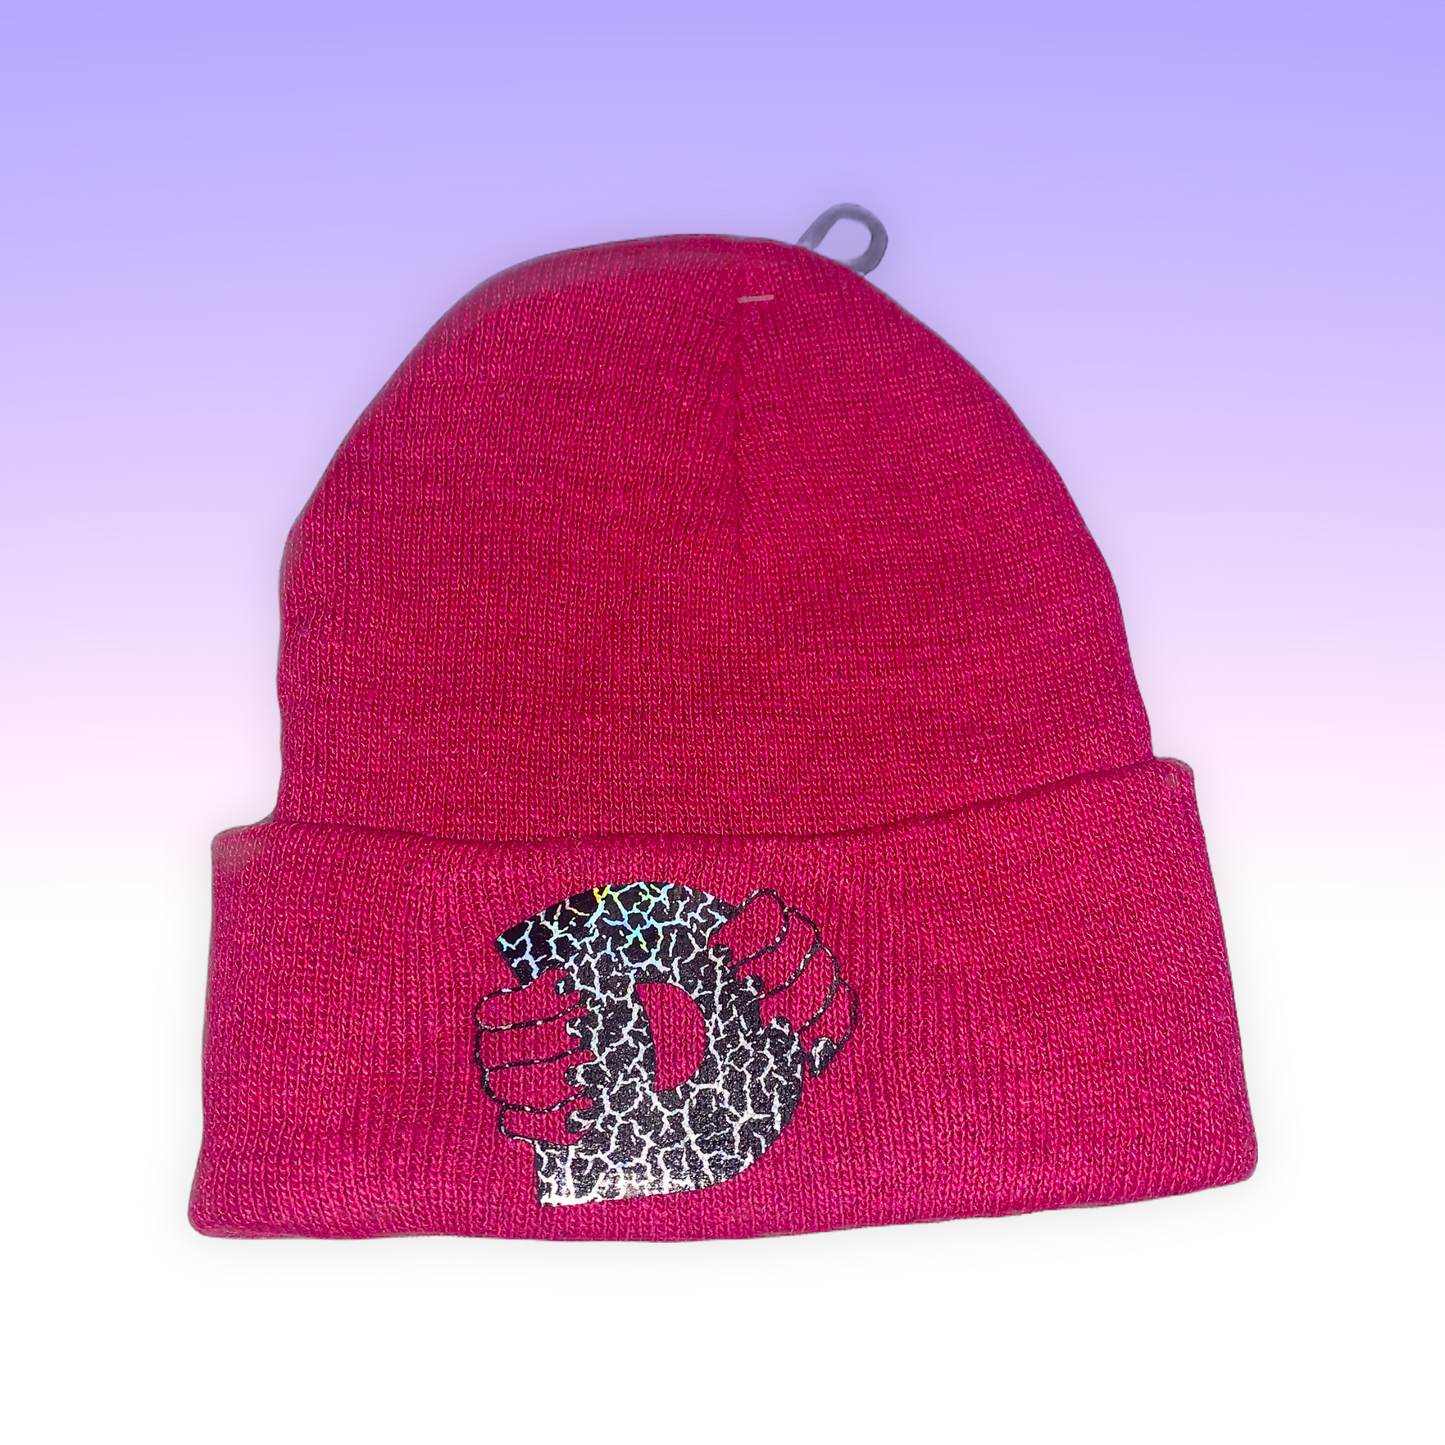 Hot Pink Beanie with Silver Vinyl